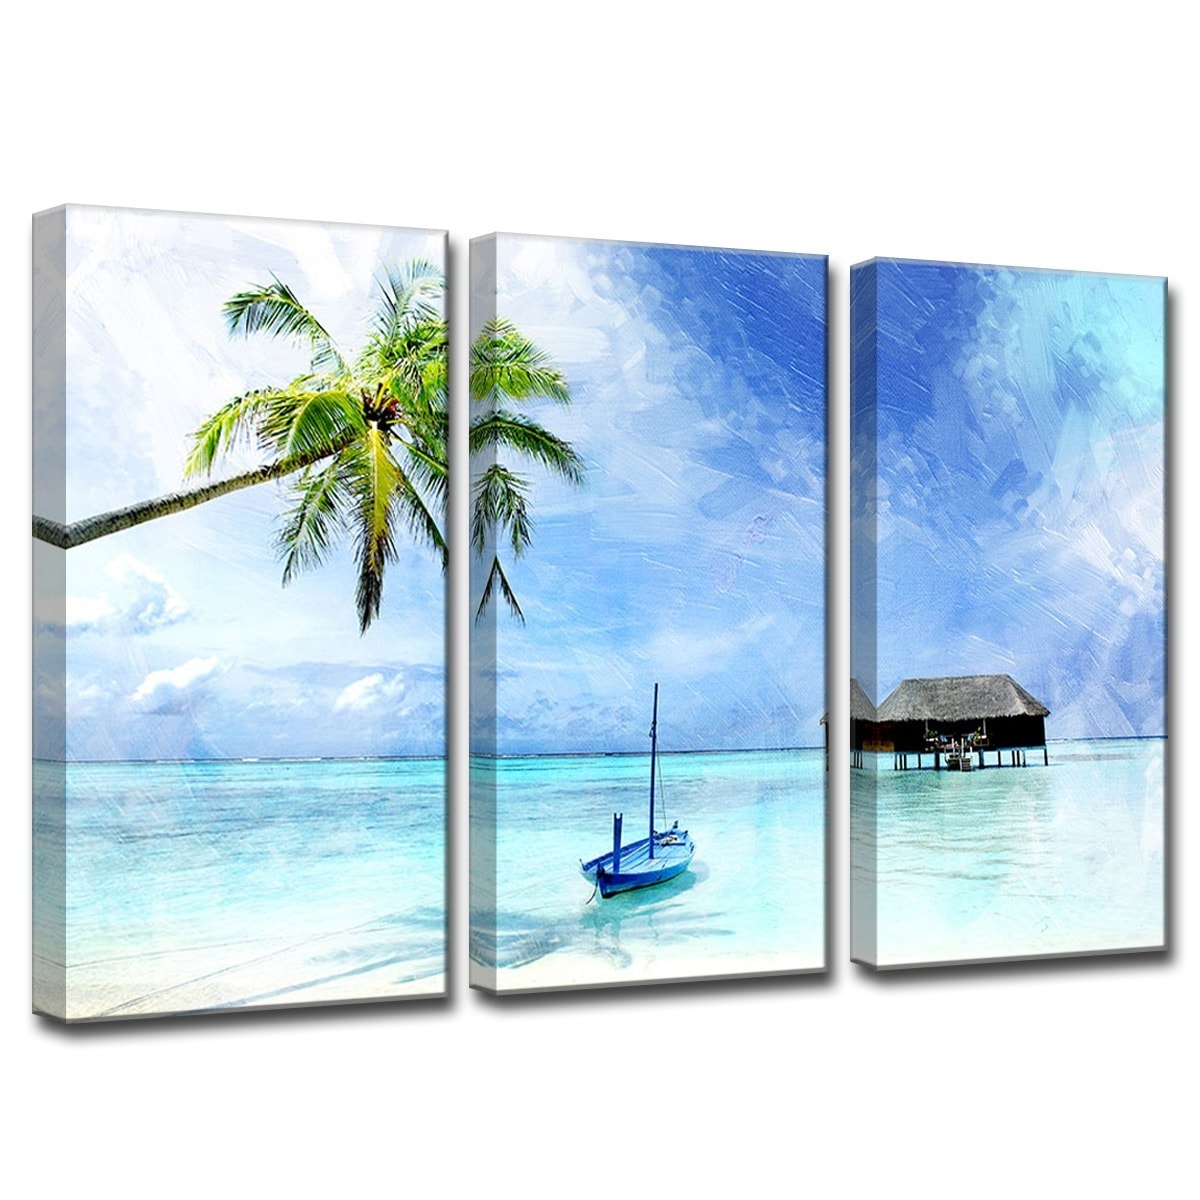 Shop Ready2hangart Tropical 3 Piece Gallery Wrapped Canvas Wall Art Set Overstock 8182291 3 Panels 20 In H X 16 In W